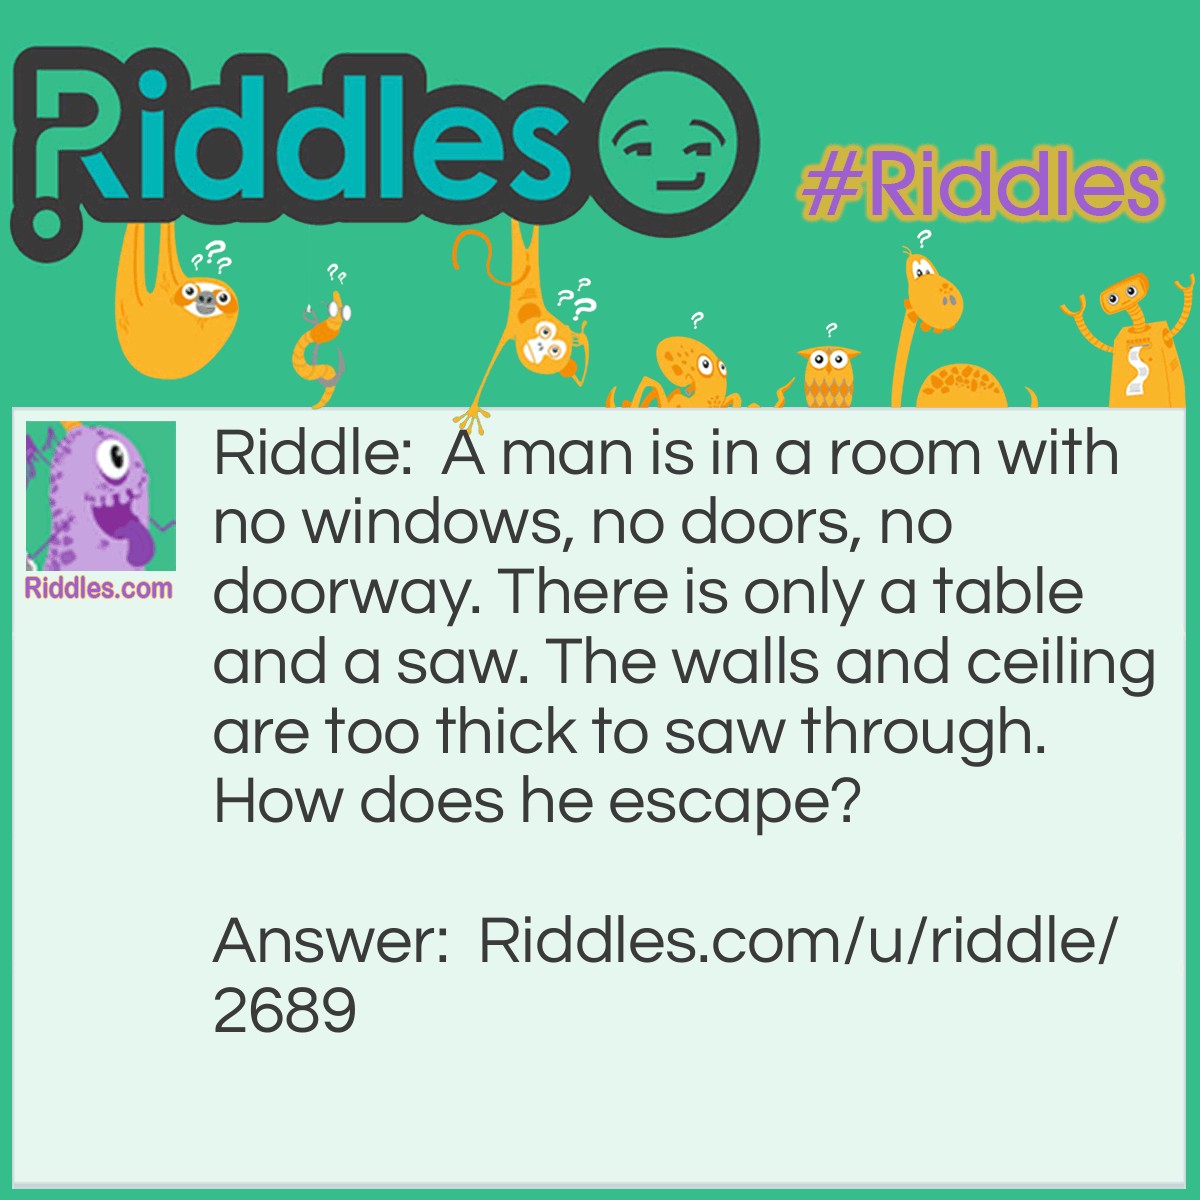 Riddle: A man is in a room with no windows, no doors, no doorway. There is only a table and a saw. The walls and ceiling are too thick to saw through. How does he escape? Answer: He cuts the table in half, and puts it together. Two halves make a whole / hole, and he escapes through the hole!